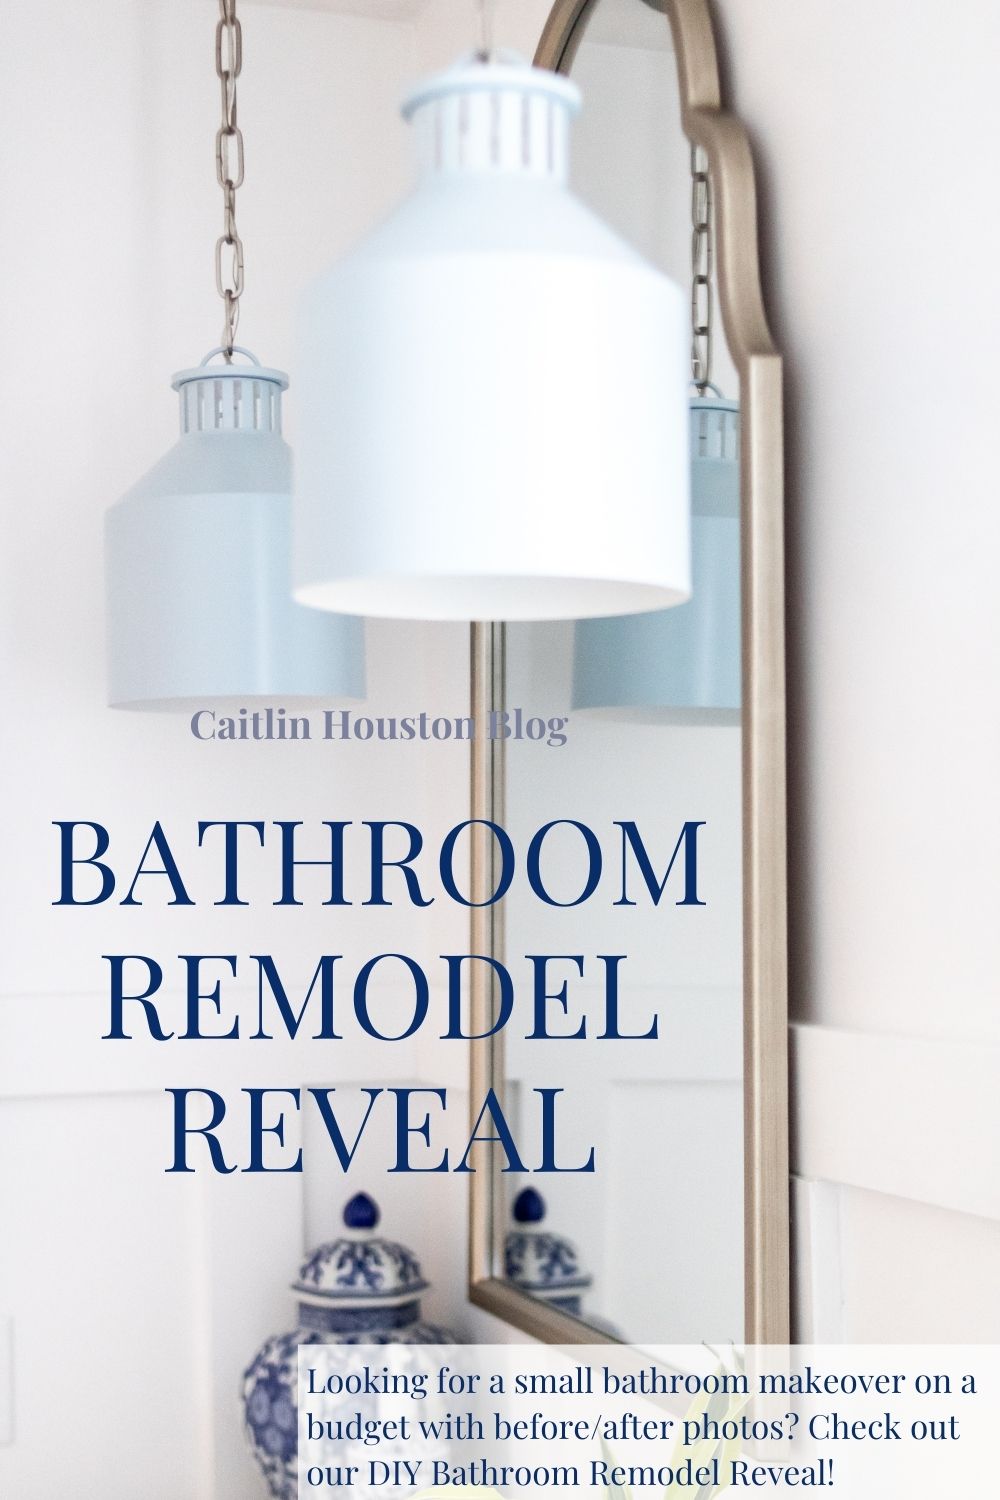 Bathroom Remodel Reveal - Looking for a small bathroom makeover on a budget with before/after photos? Check out our DIY Bathroom Remodel Reveal!